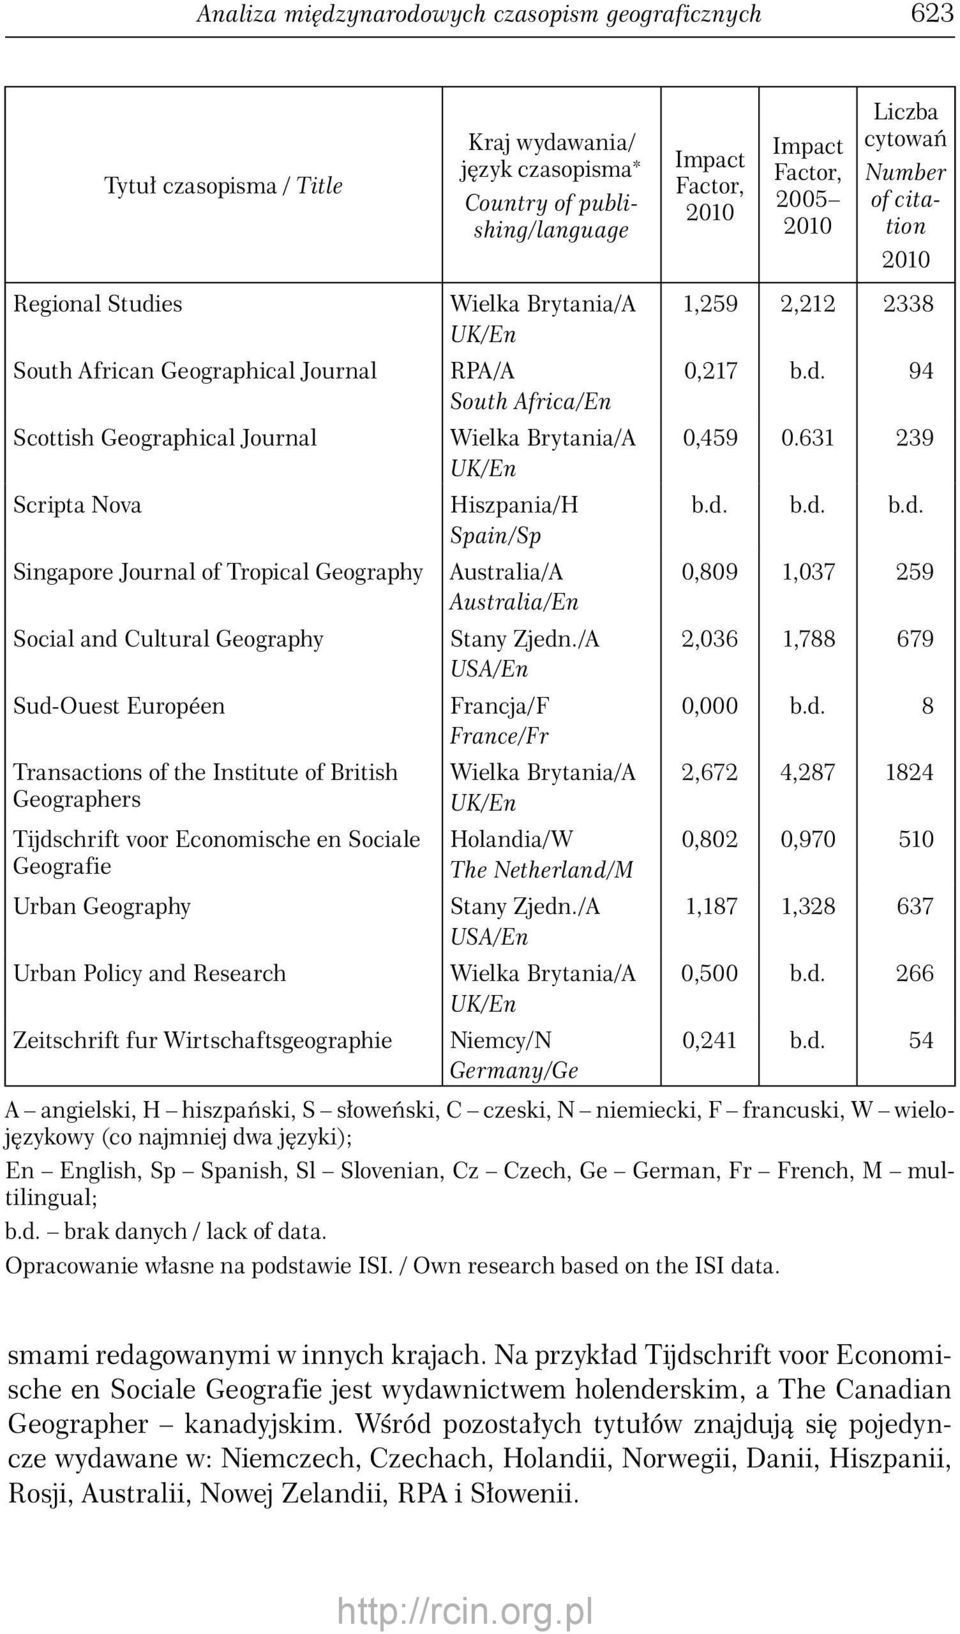 Transactions of the Institute of British Geographers Tijdschrift voor Economische en Sociale Geografie Urban Geography Urban Policy and Research Zeitschrift fur Wirtschaftsgeographie RPA/A South